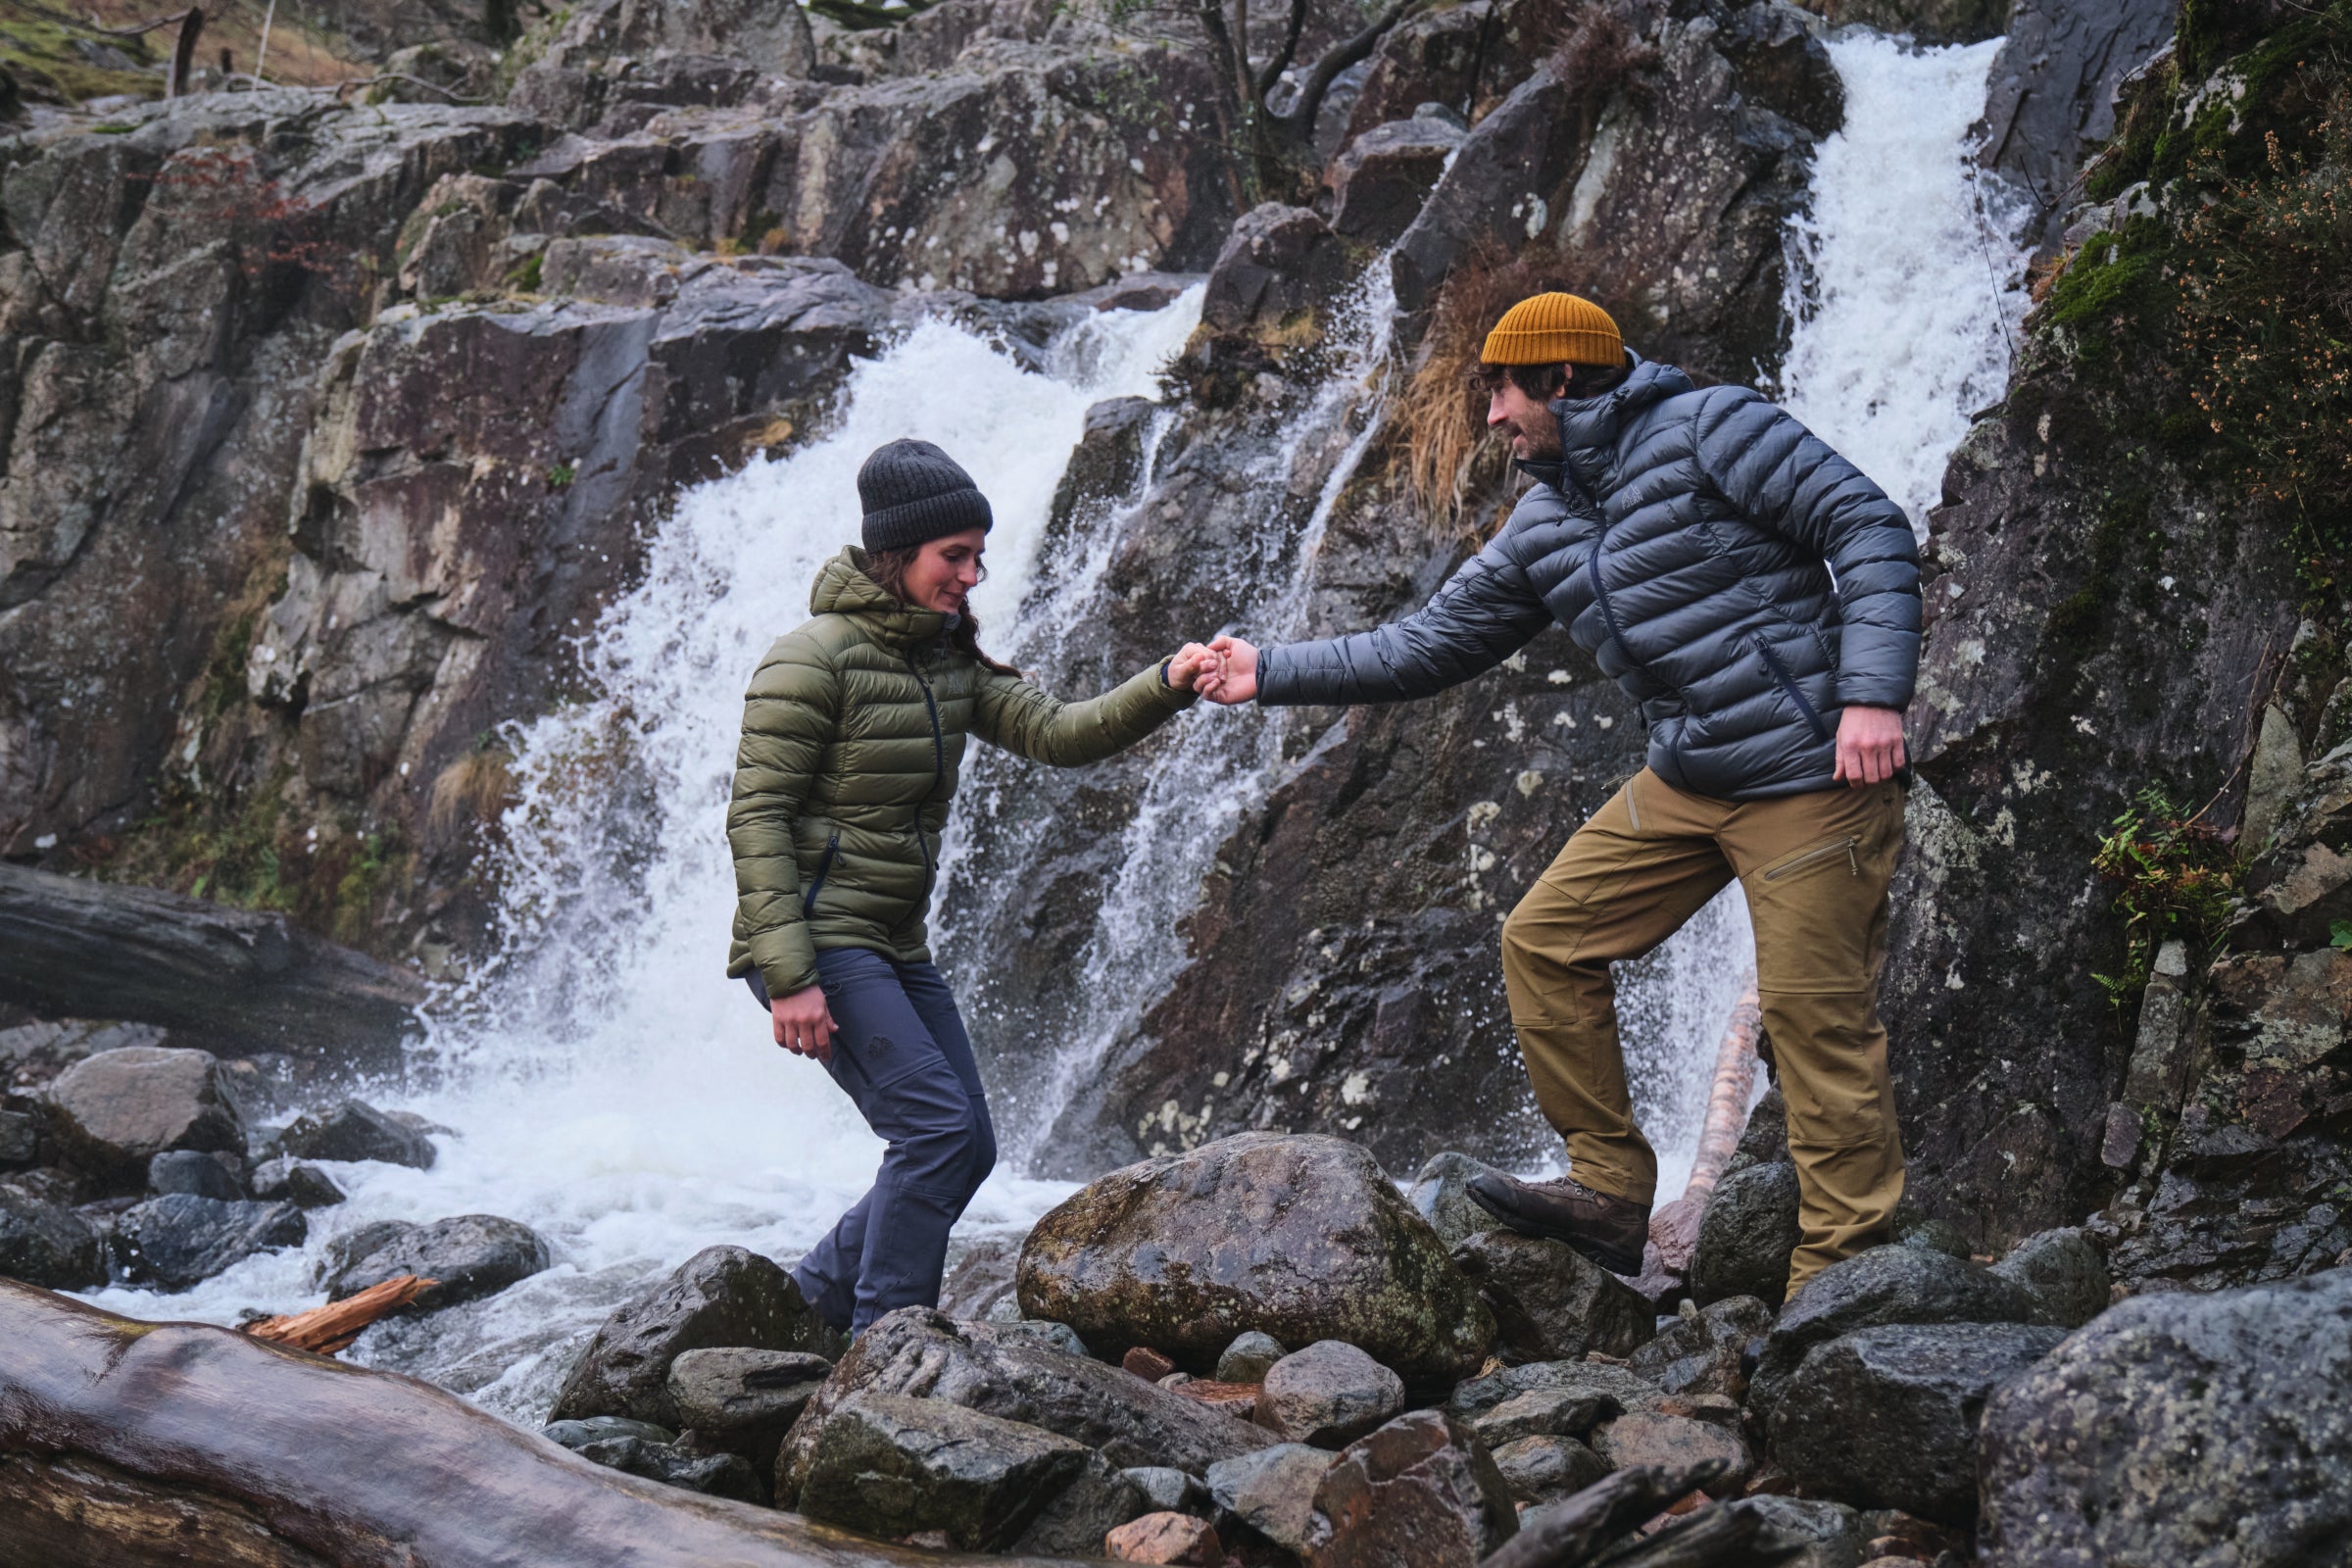 Hikers in Fjern Arktis II Jackets and Vinter Trousers assist each other across a stream